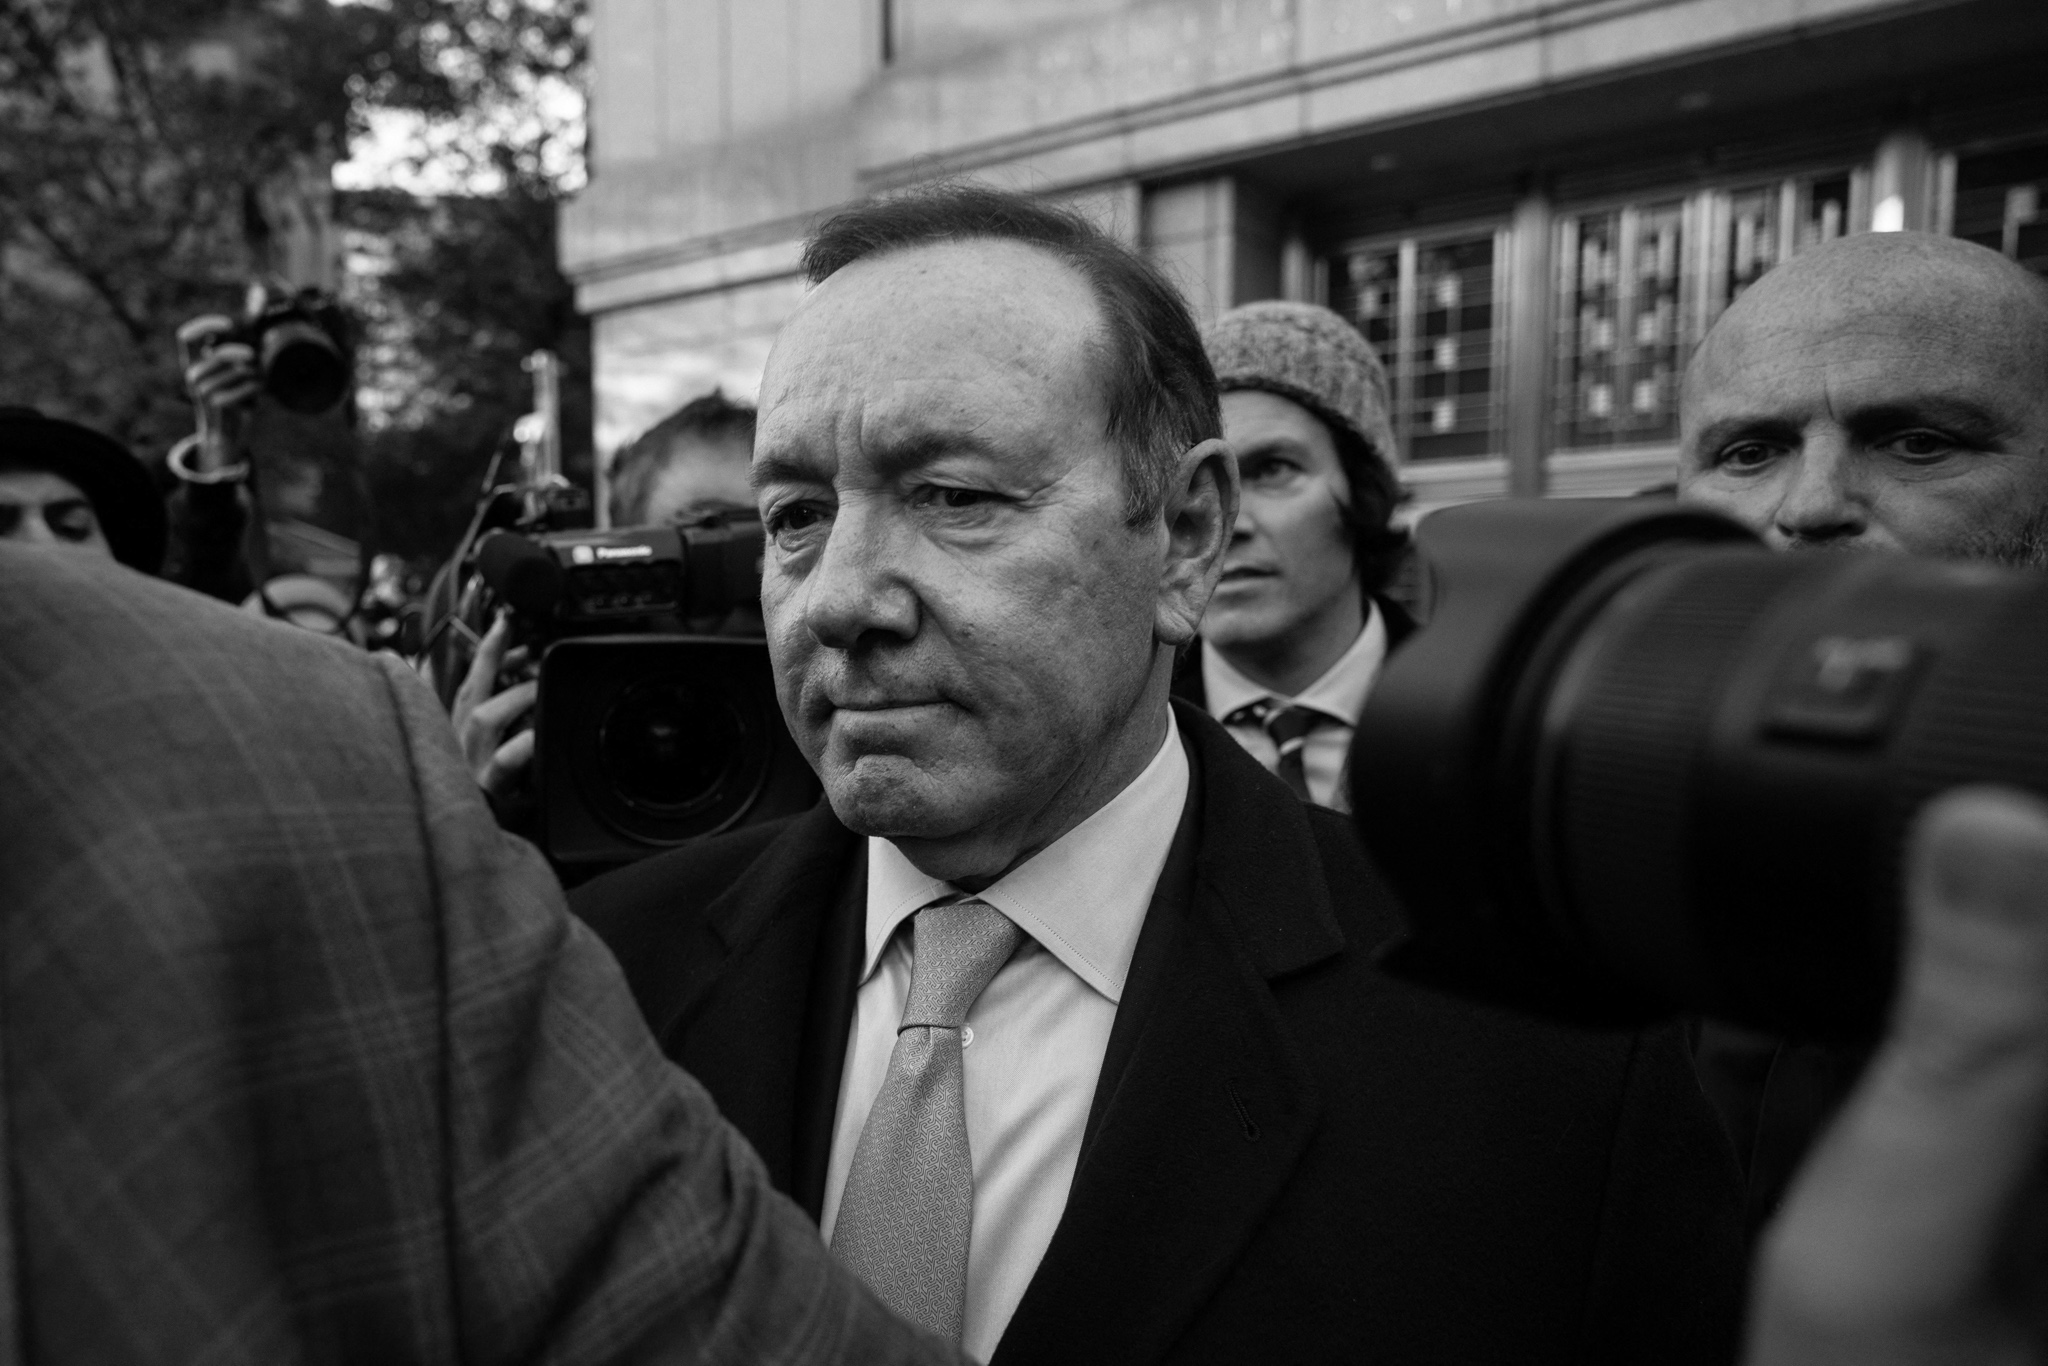 new-york-jury-finds-kevin-spacey-not-guilty-in-civil-case-that-derailed-the-actor's-career